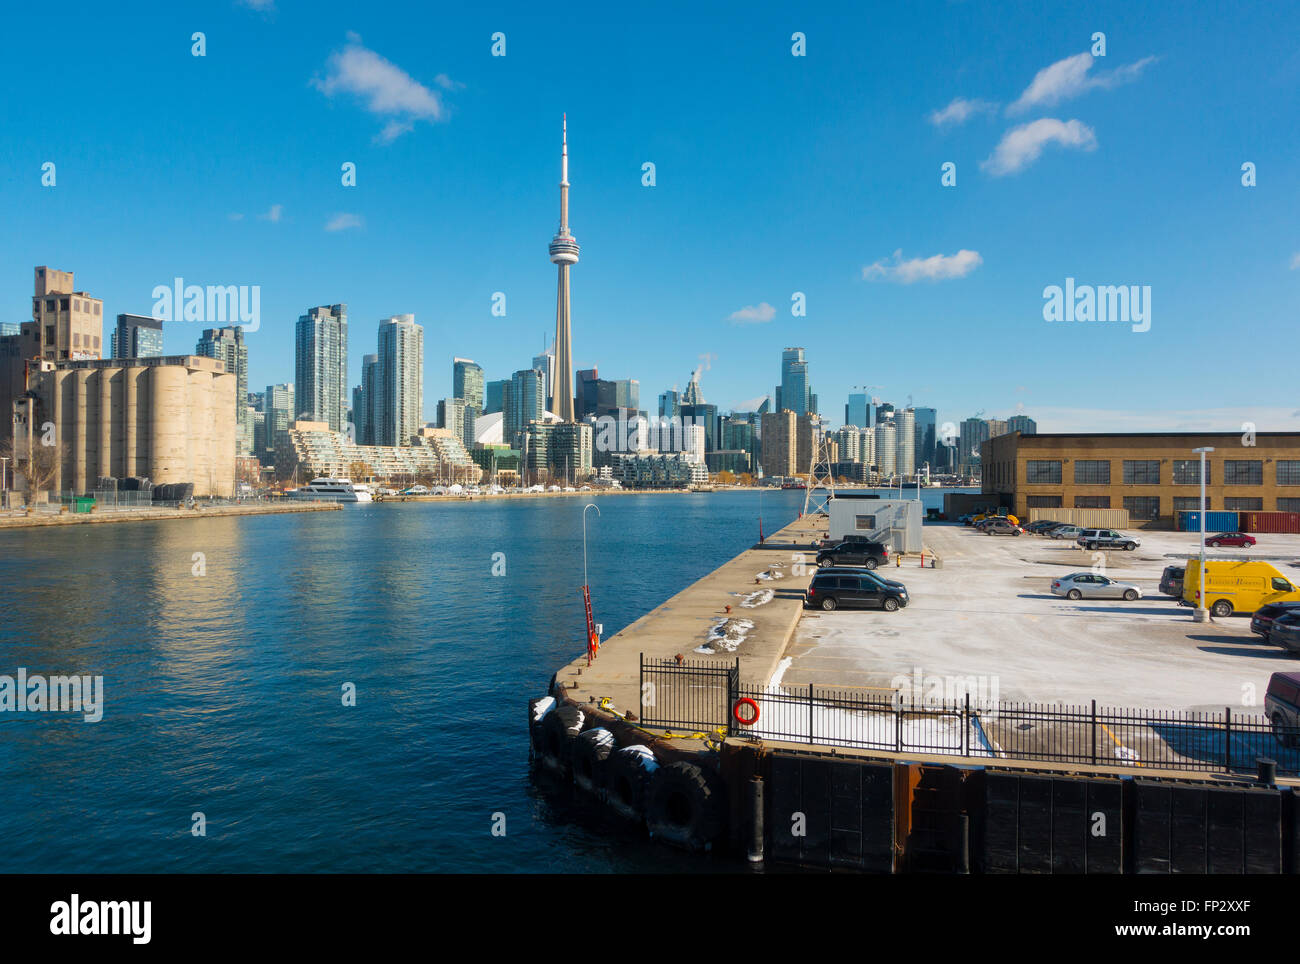 The Toronto skyline from the Billy Bishop Toronto City Airport overlooking the parking lot. Toronto, Ontario, Canada. Stock Photo